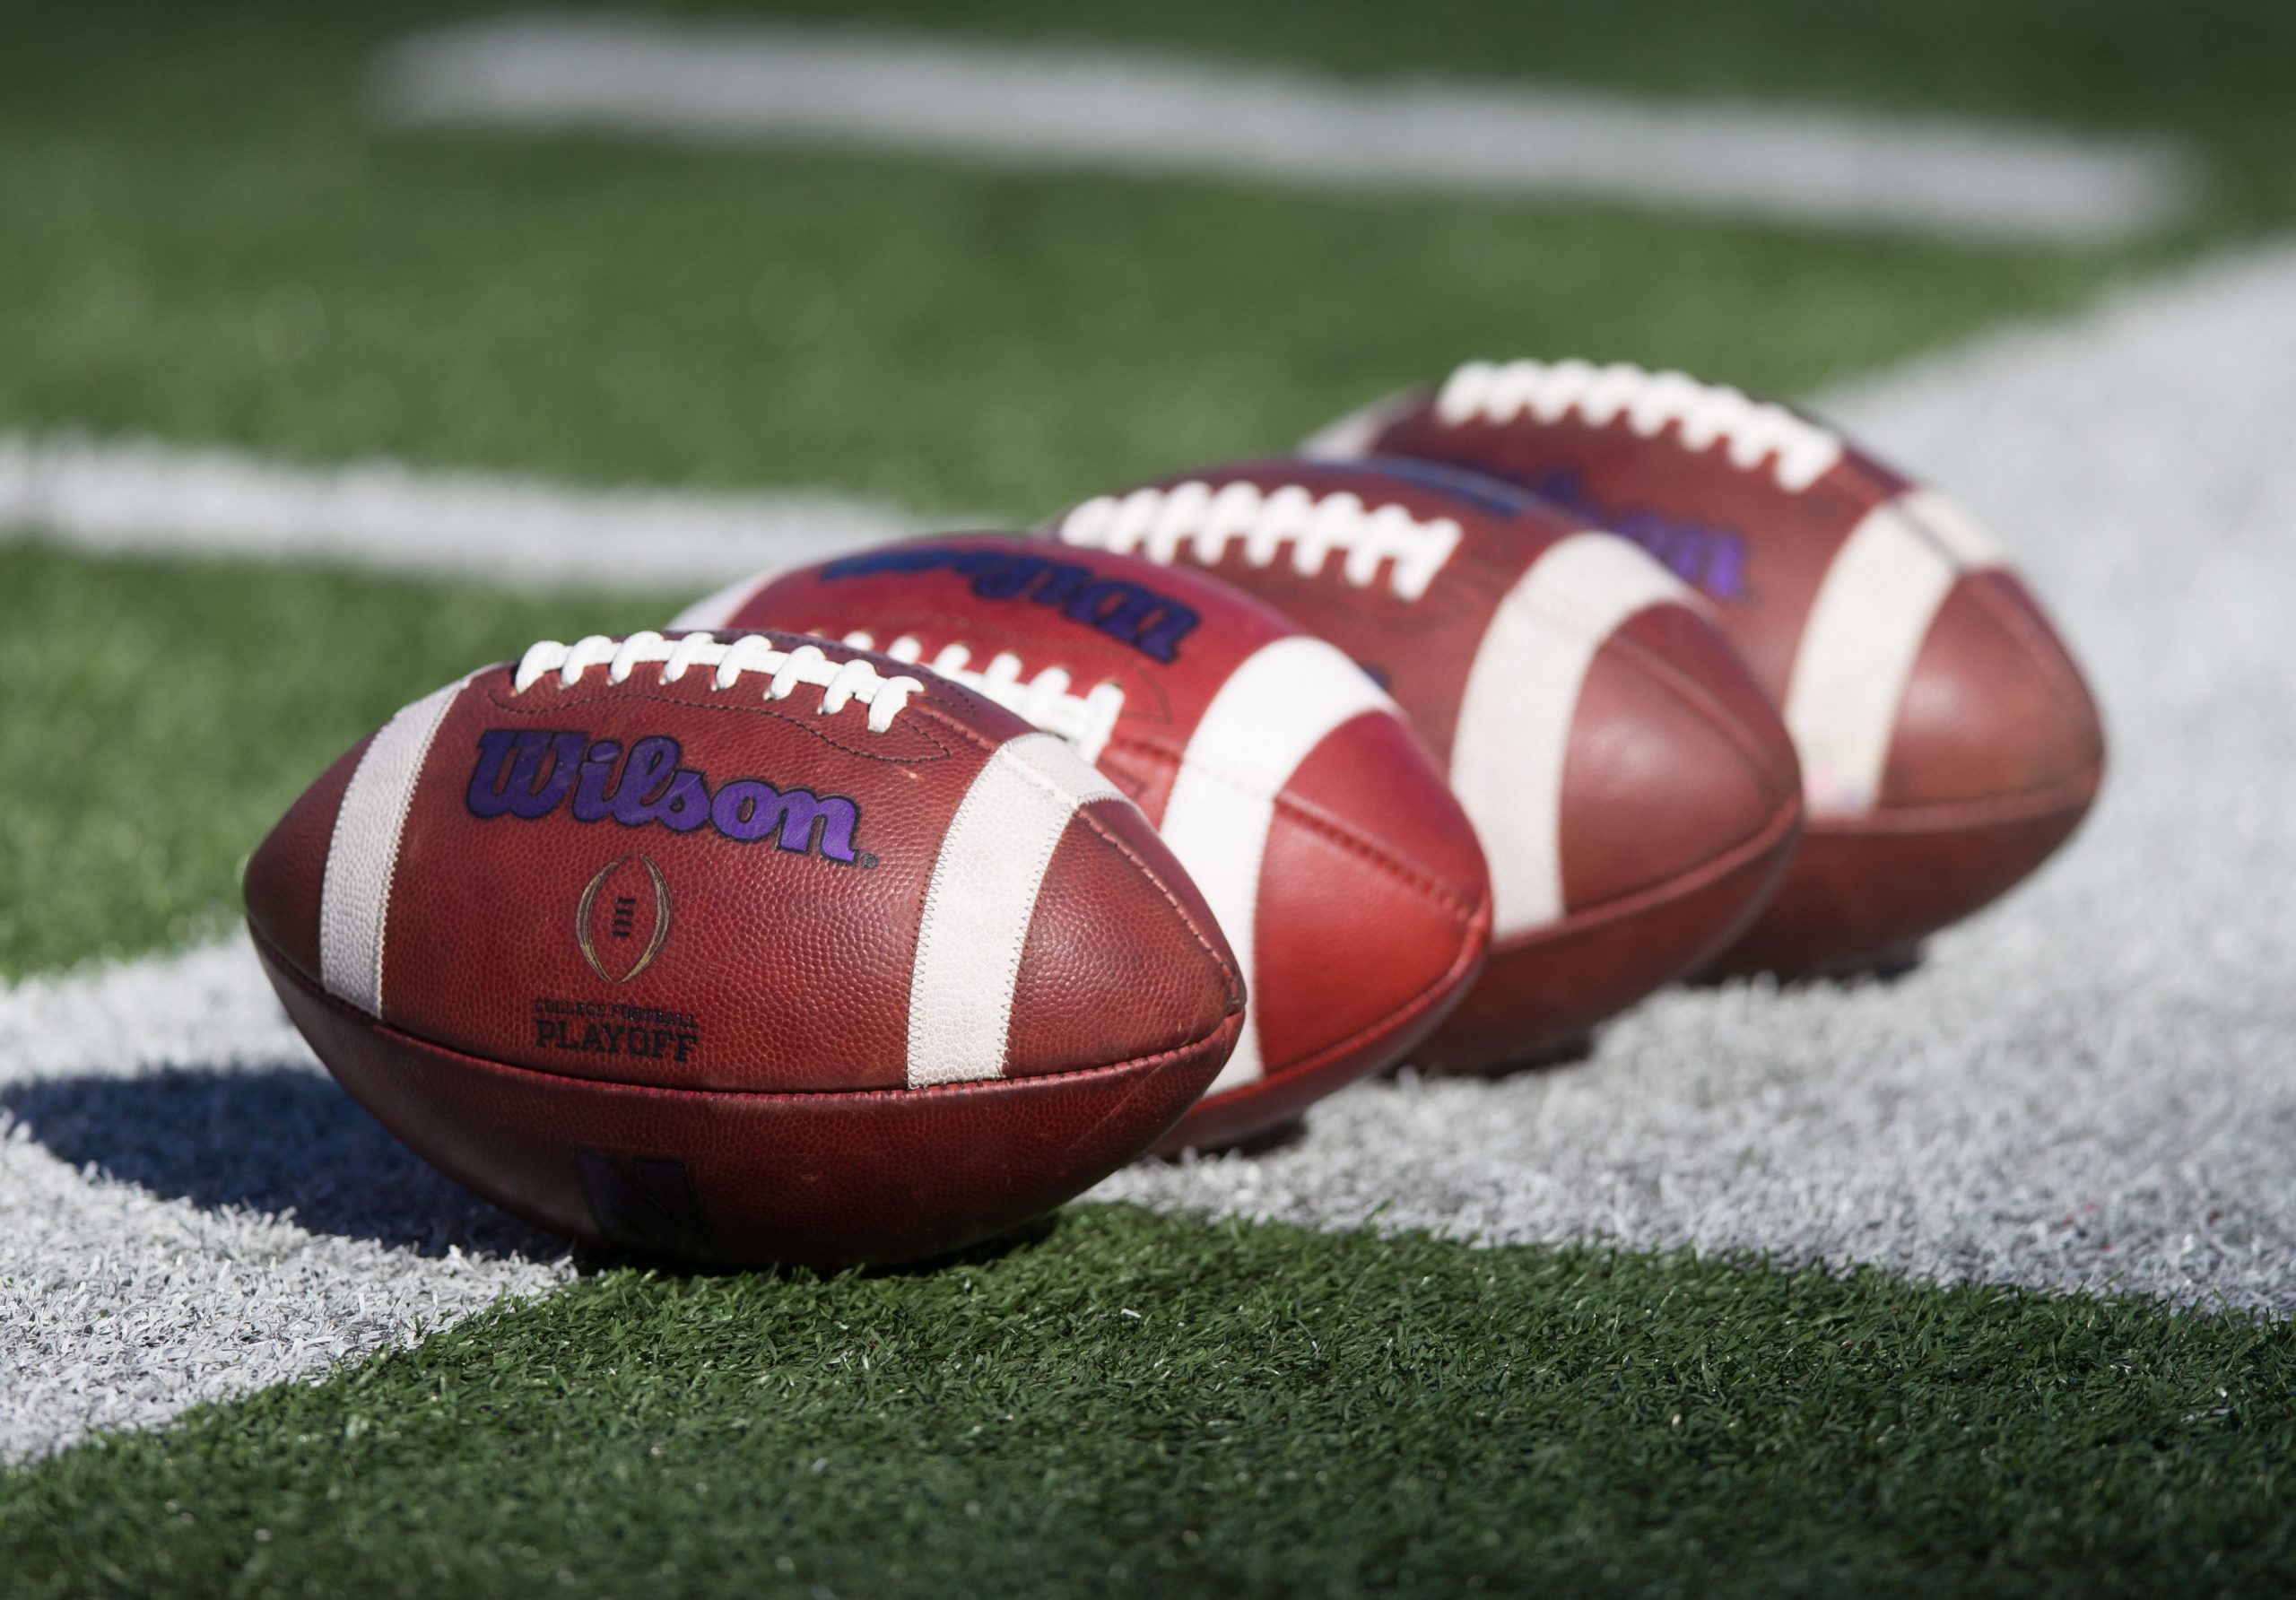 more college football teams expected to face ncaa investigation